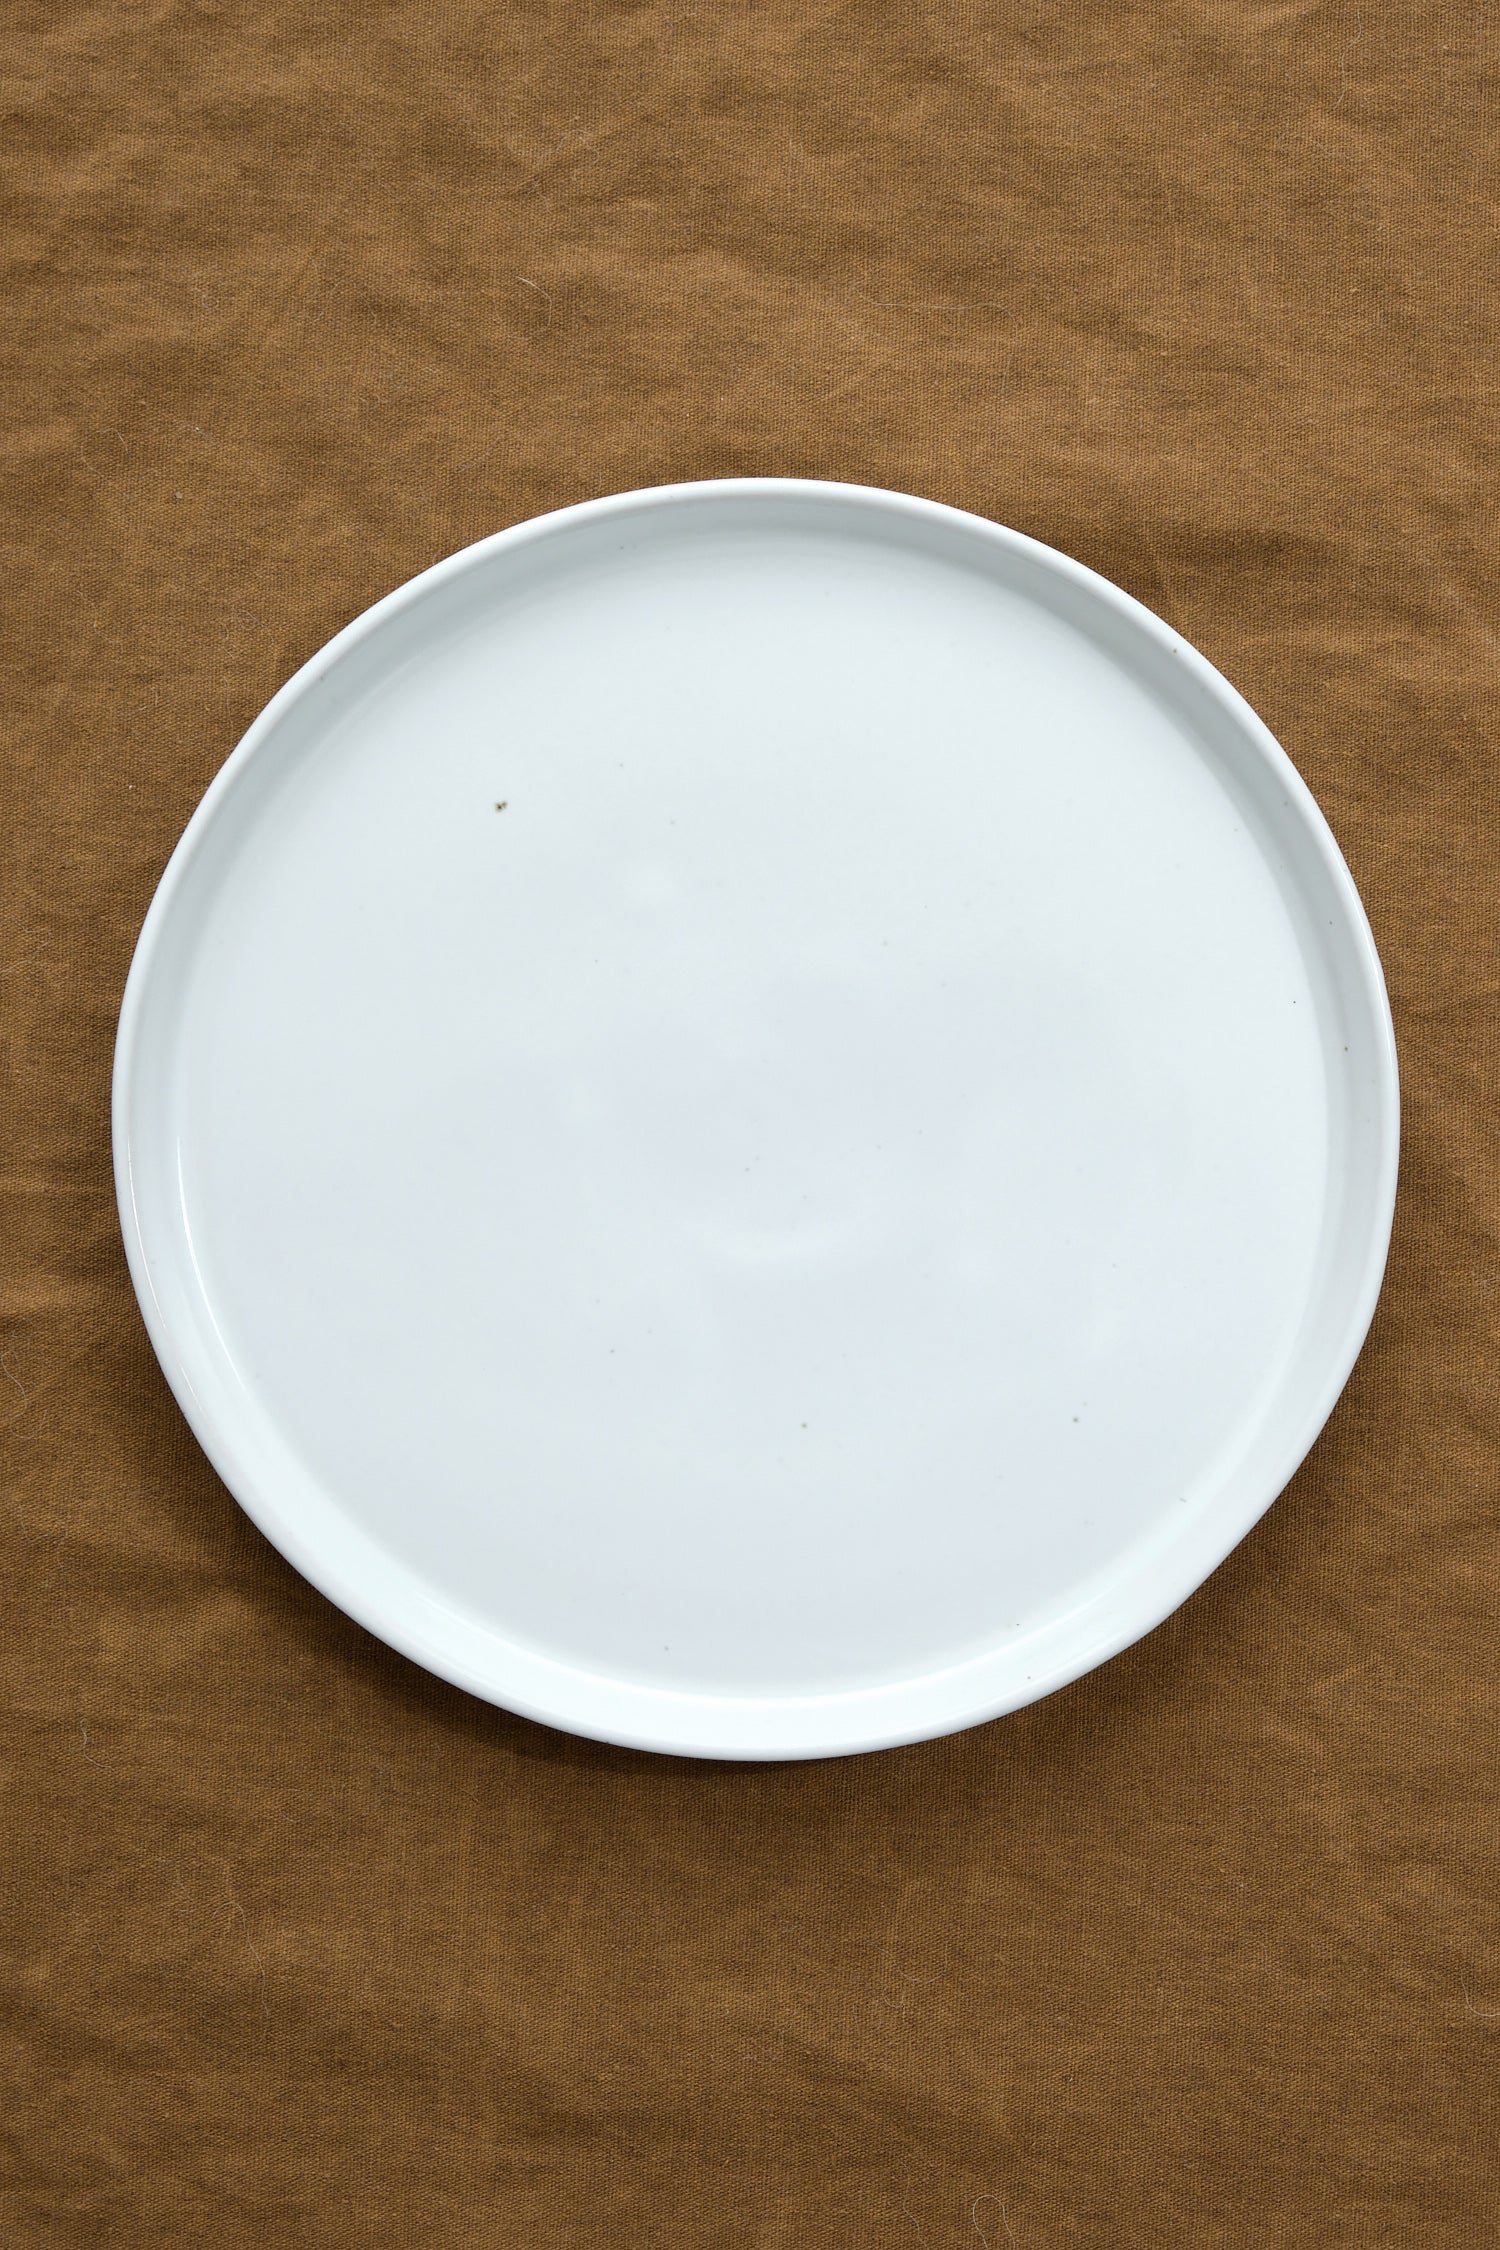 Large Standard Plate in white